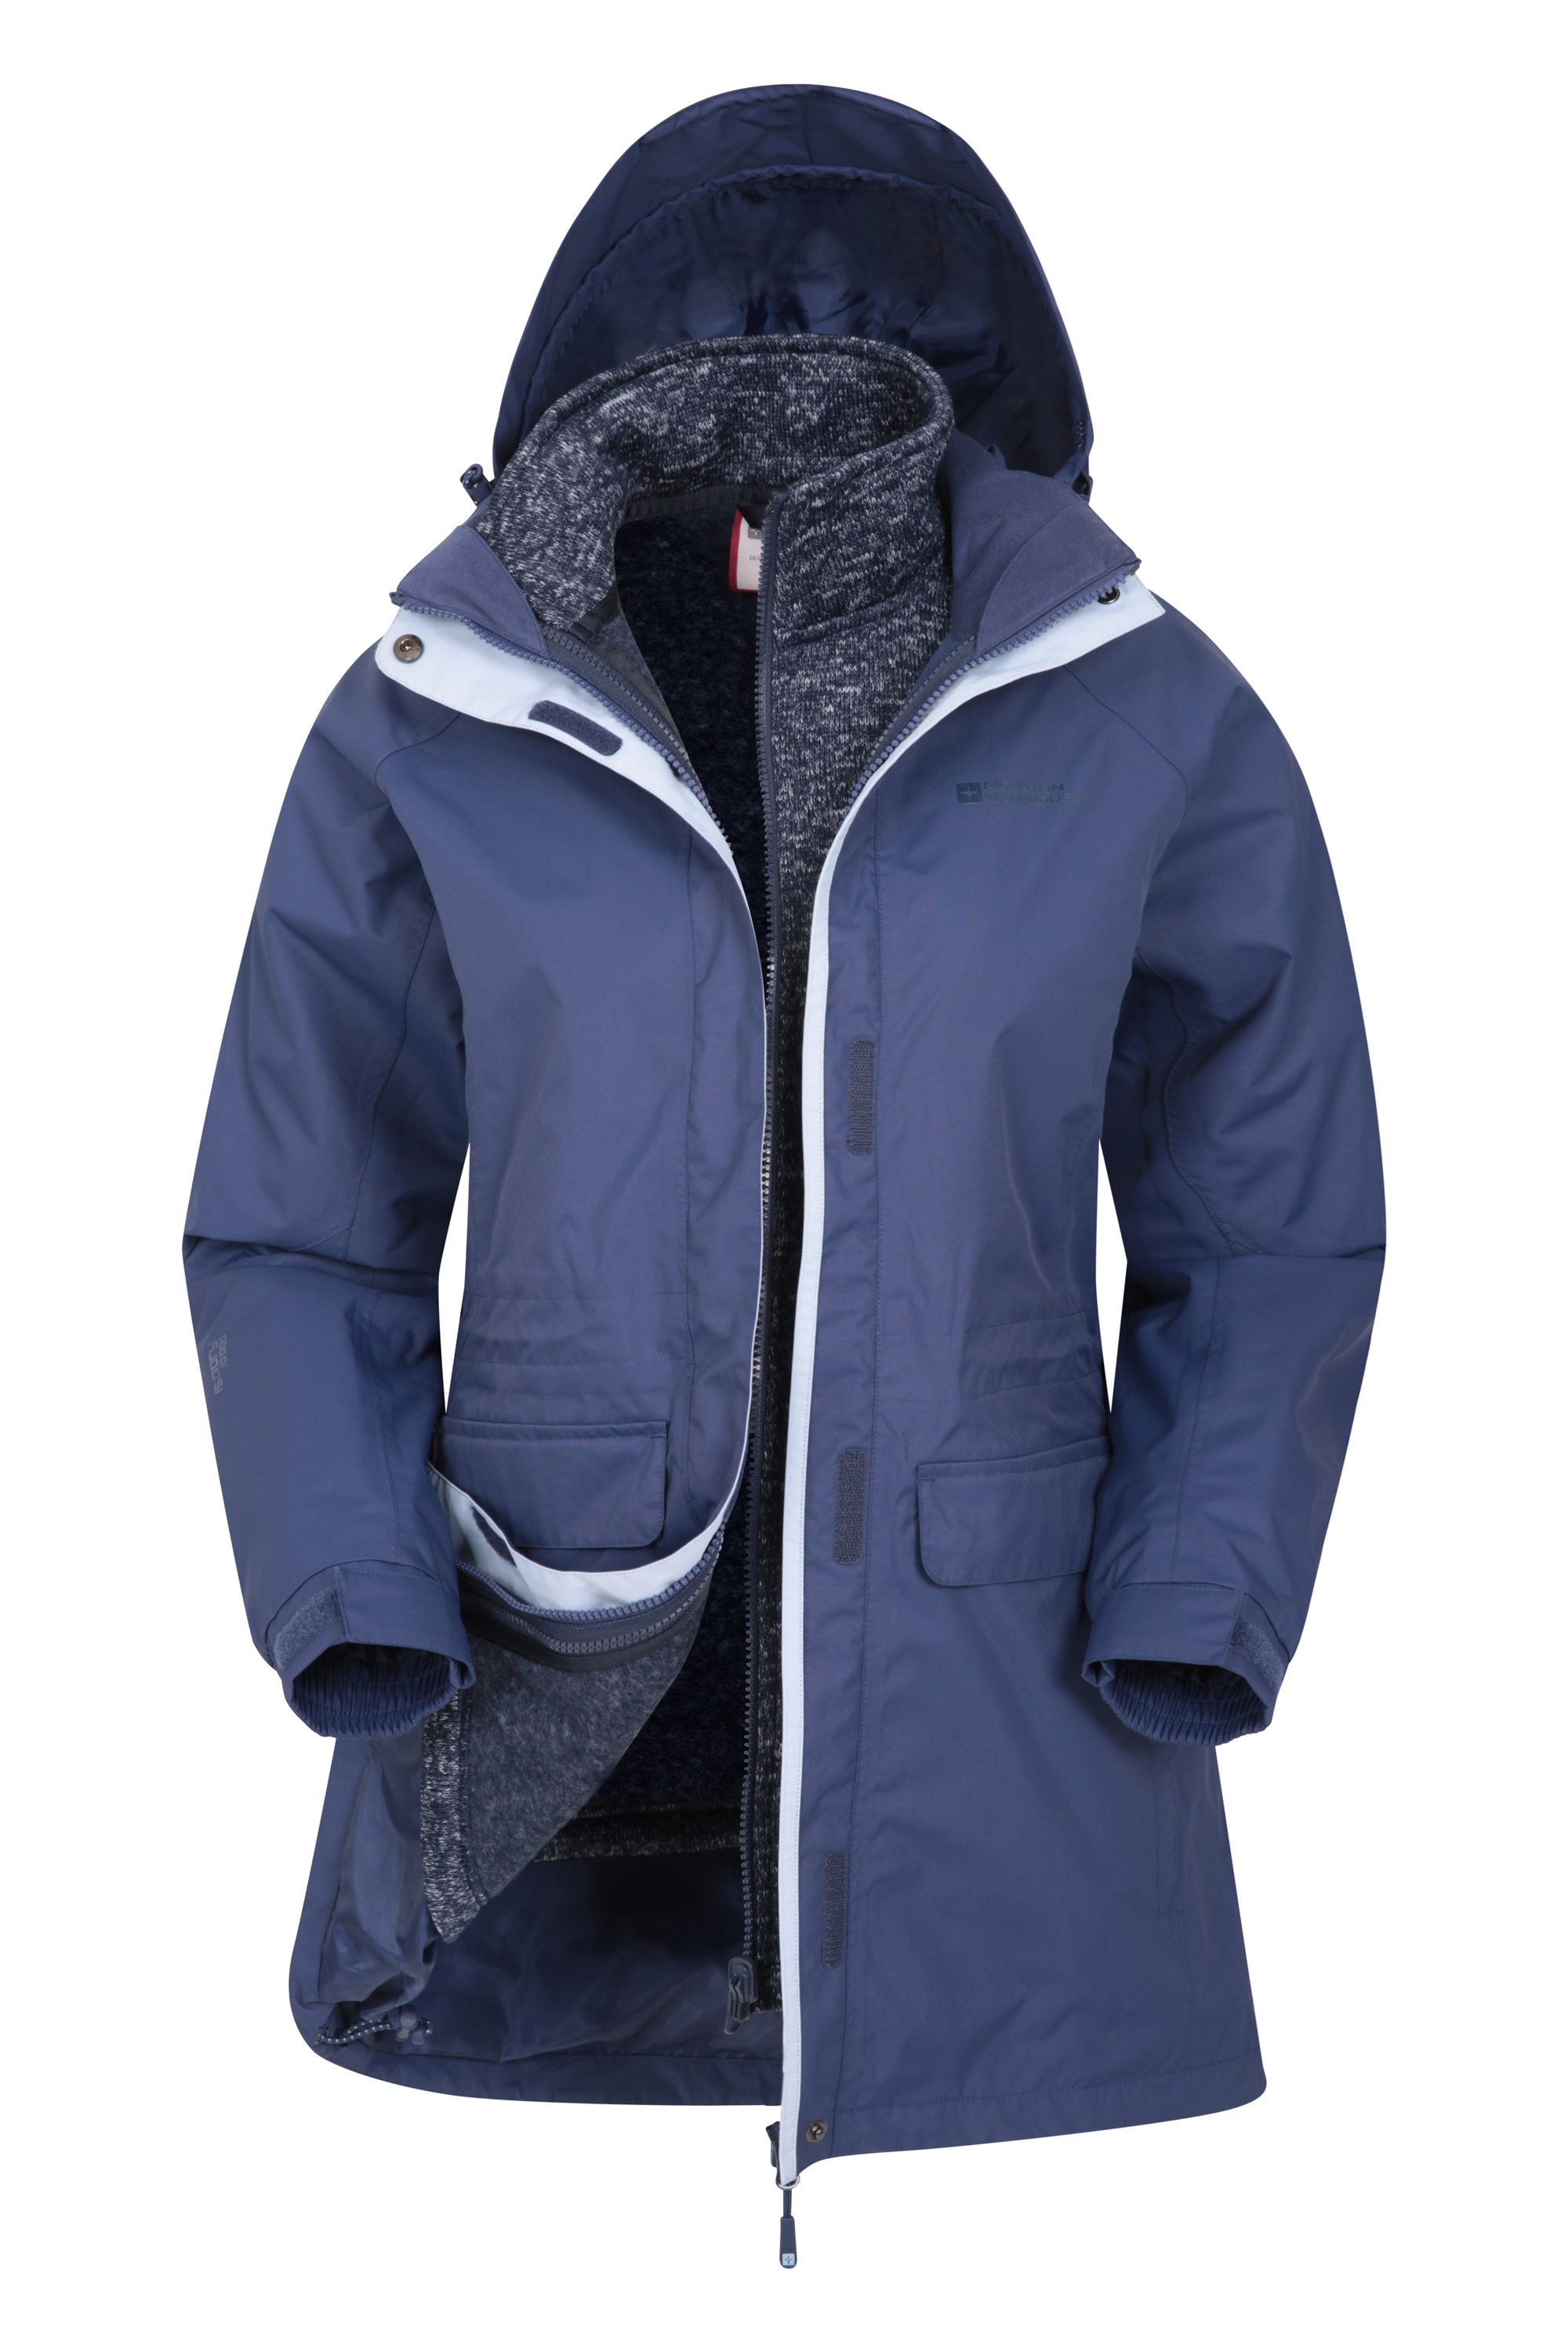 Glacial Extreme Long 3-in-1 Womens Jacket - Navy